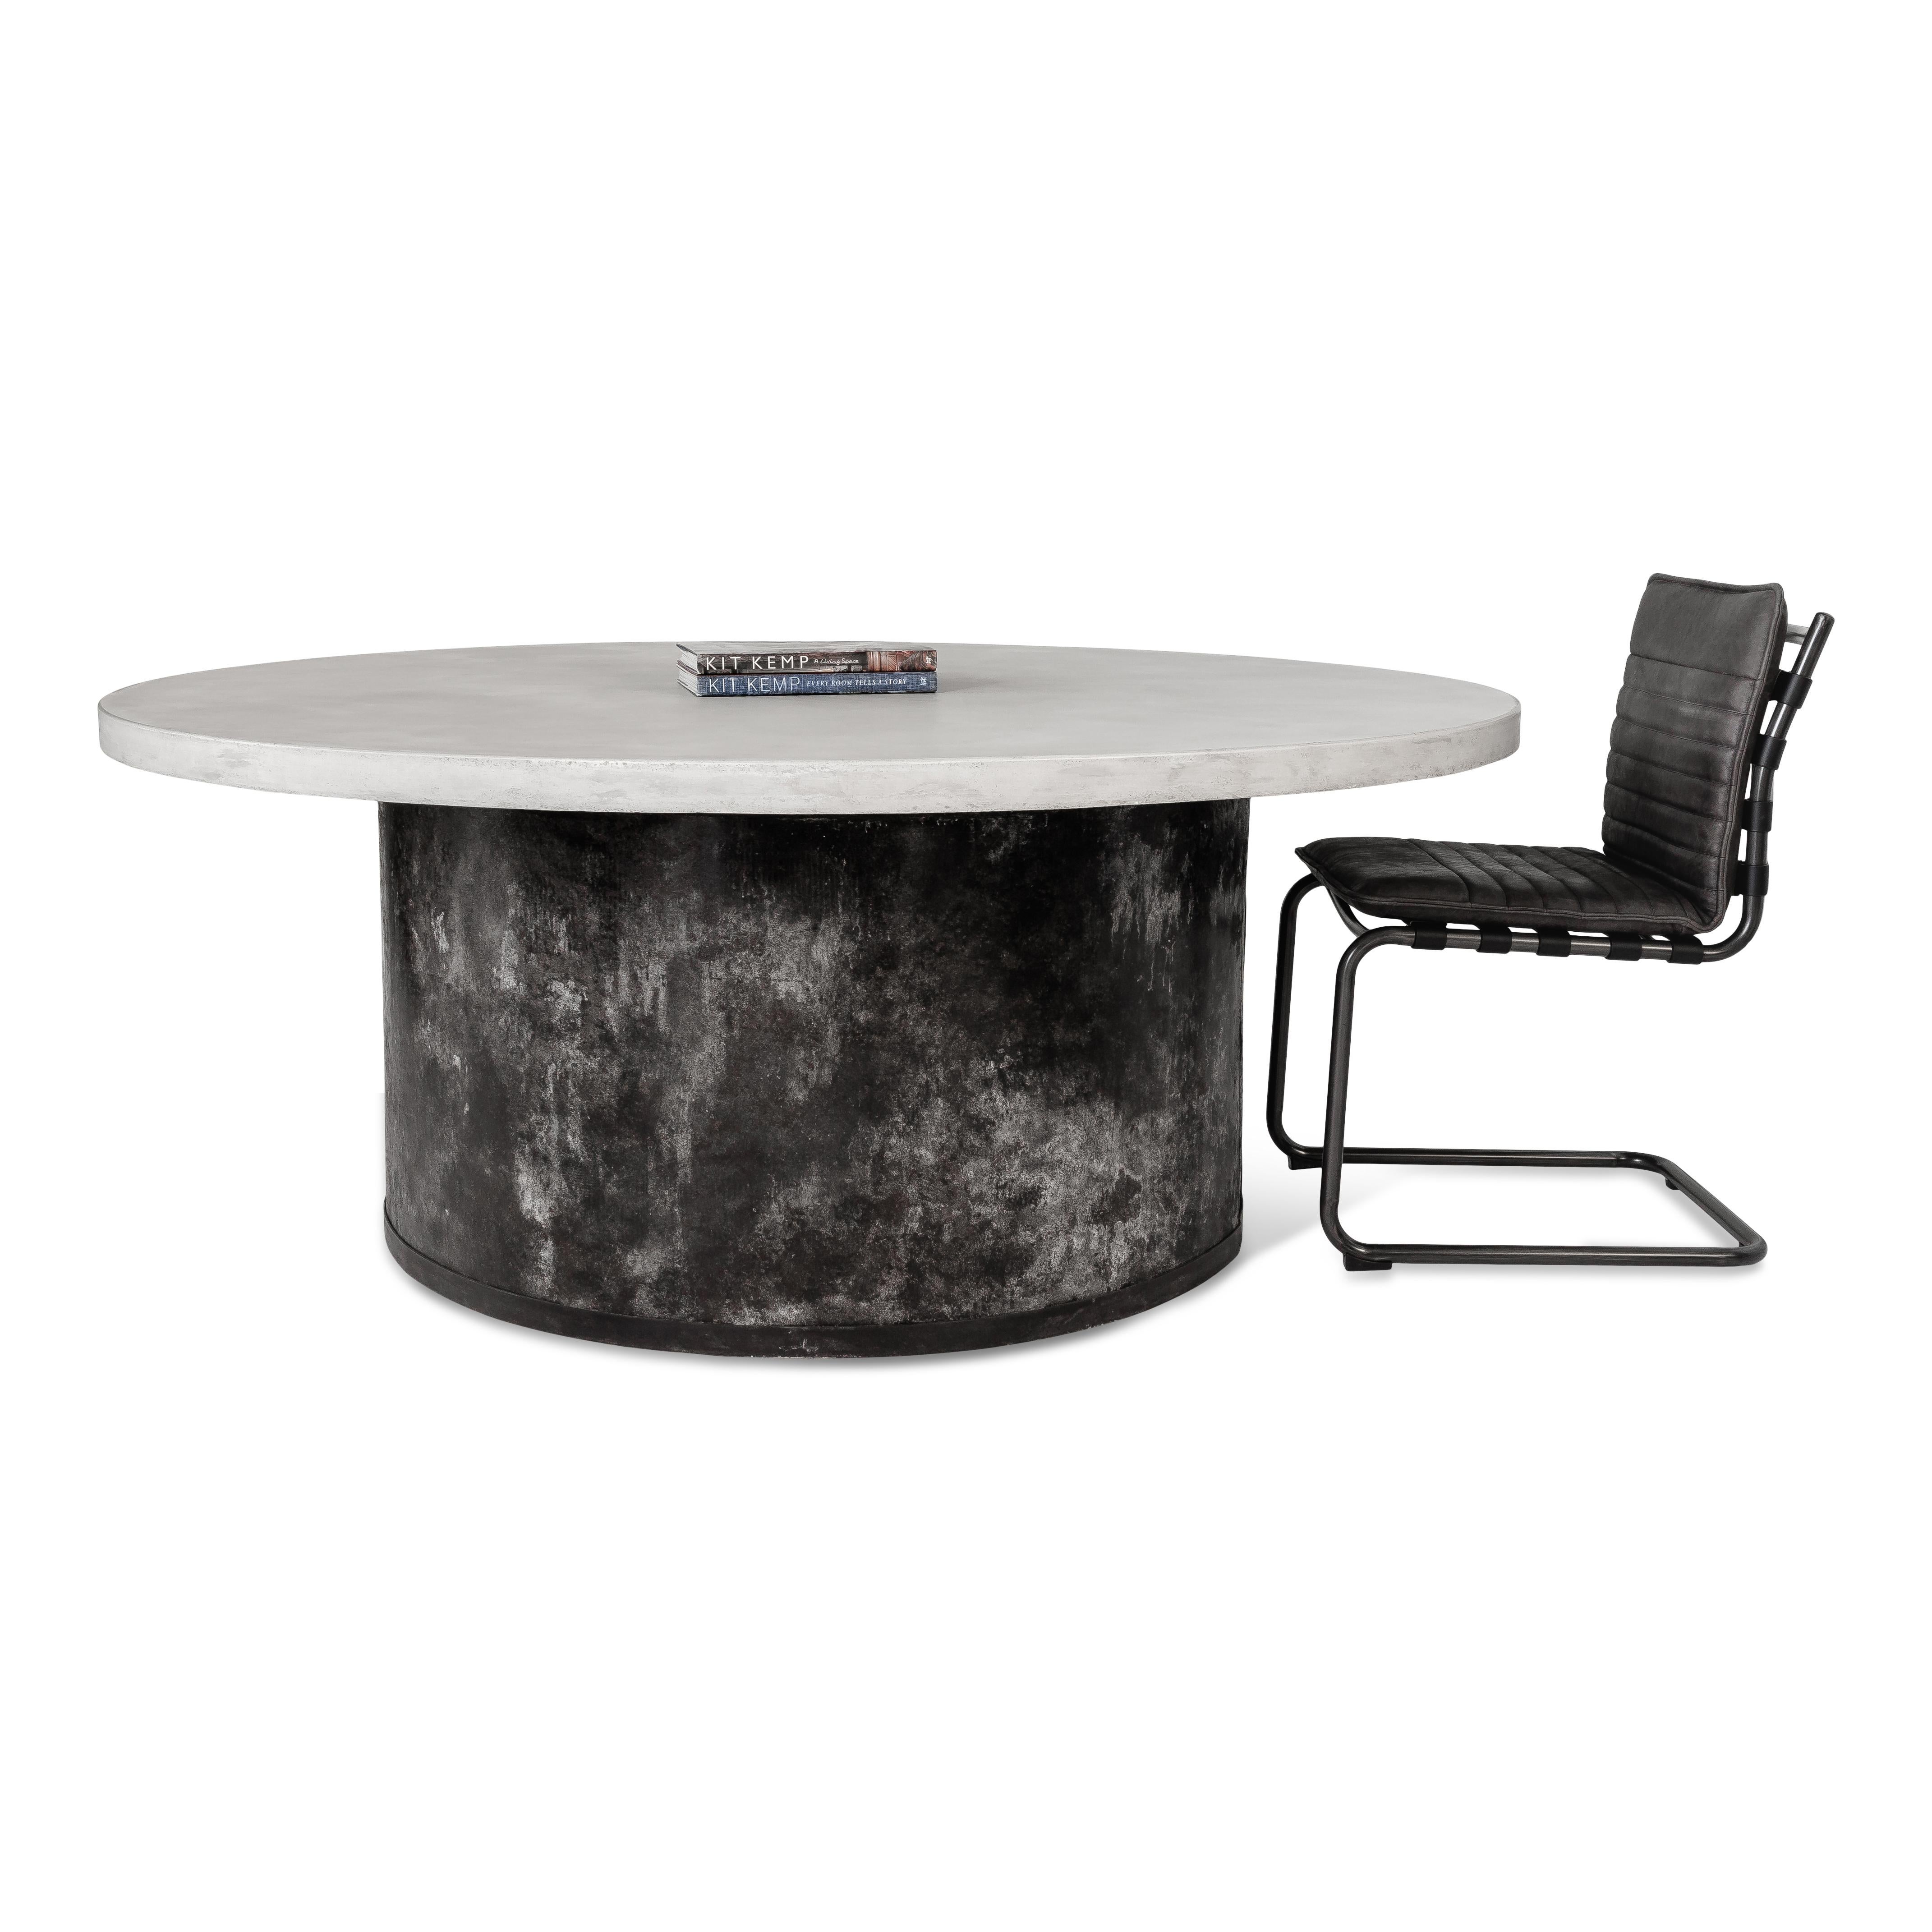 White concrete round top dining table with industrial barrel base.

Piece from our one of a kind collection, Le Monde.